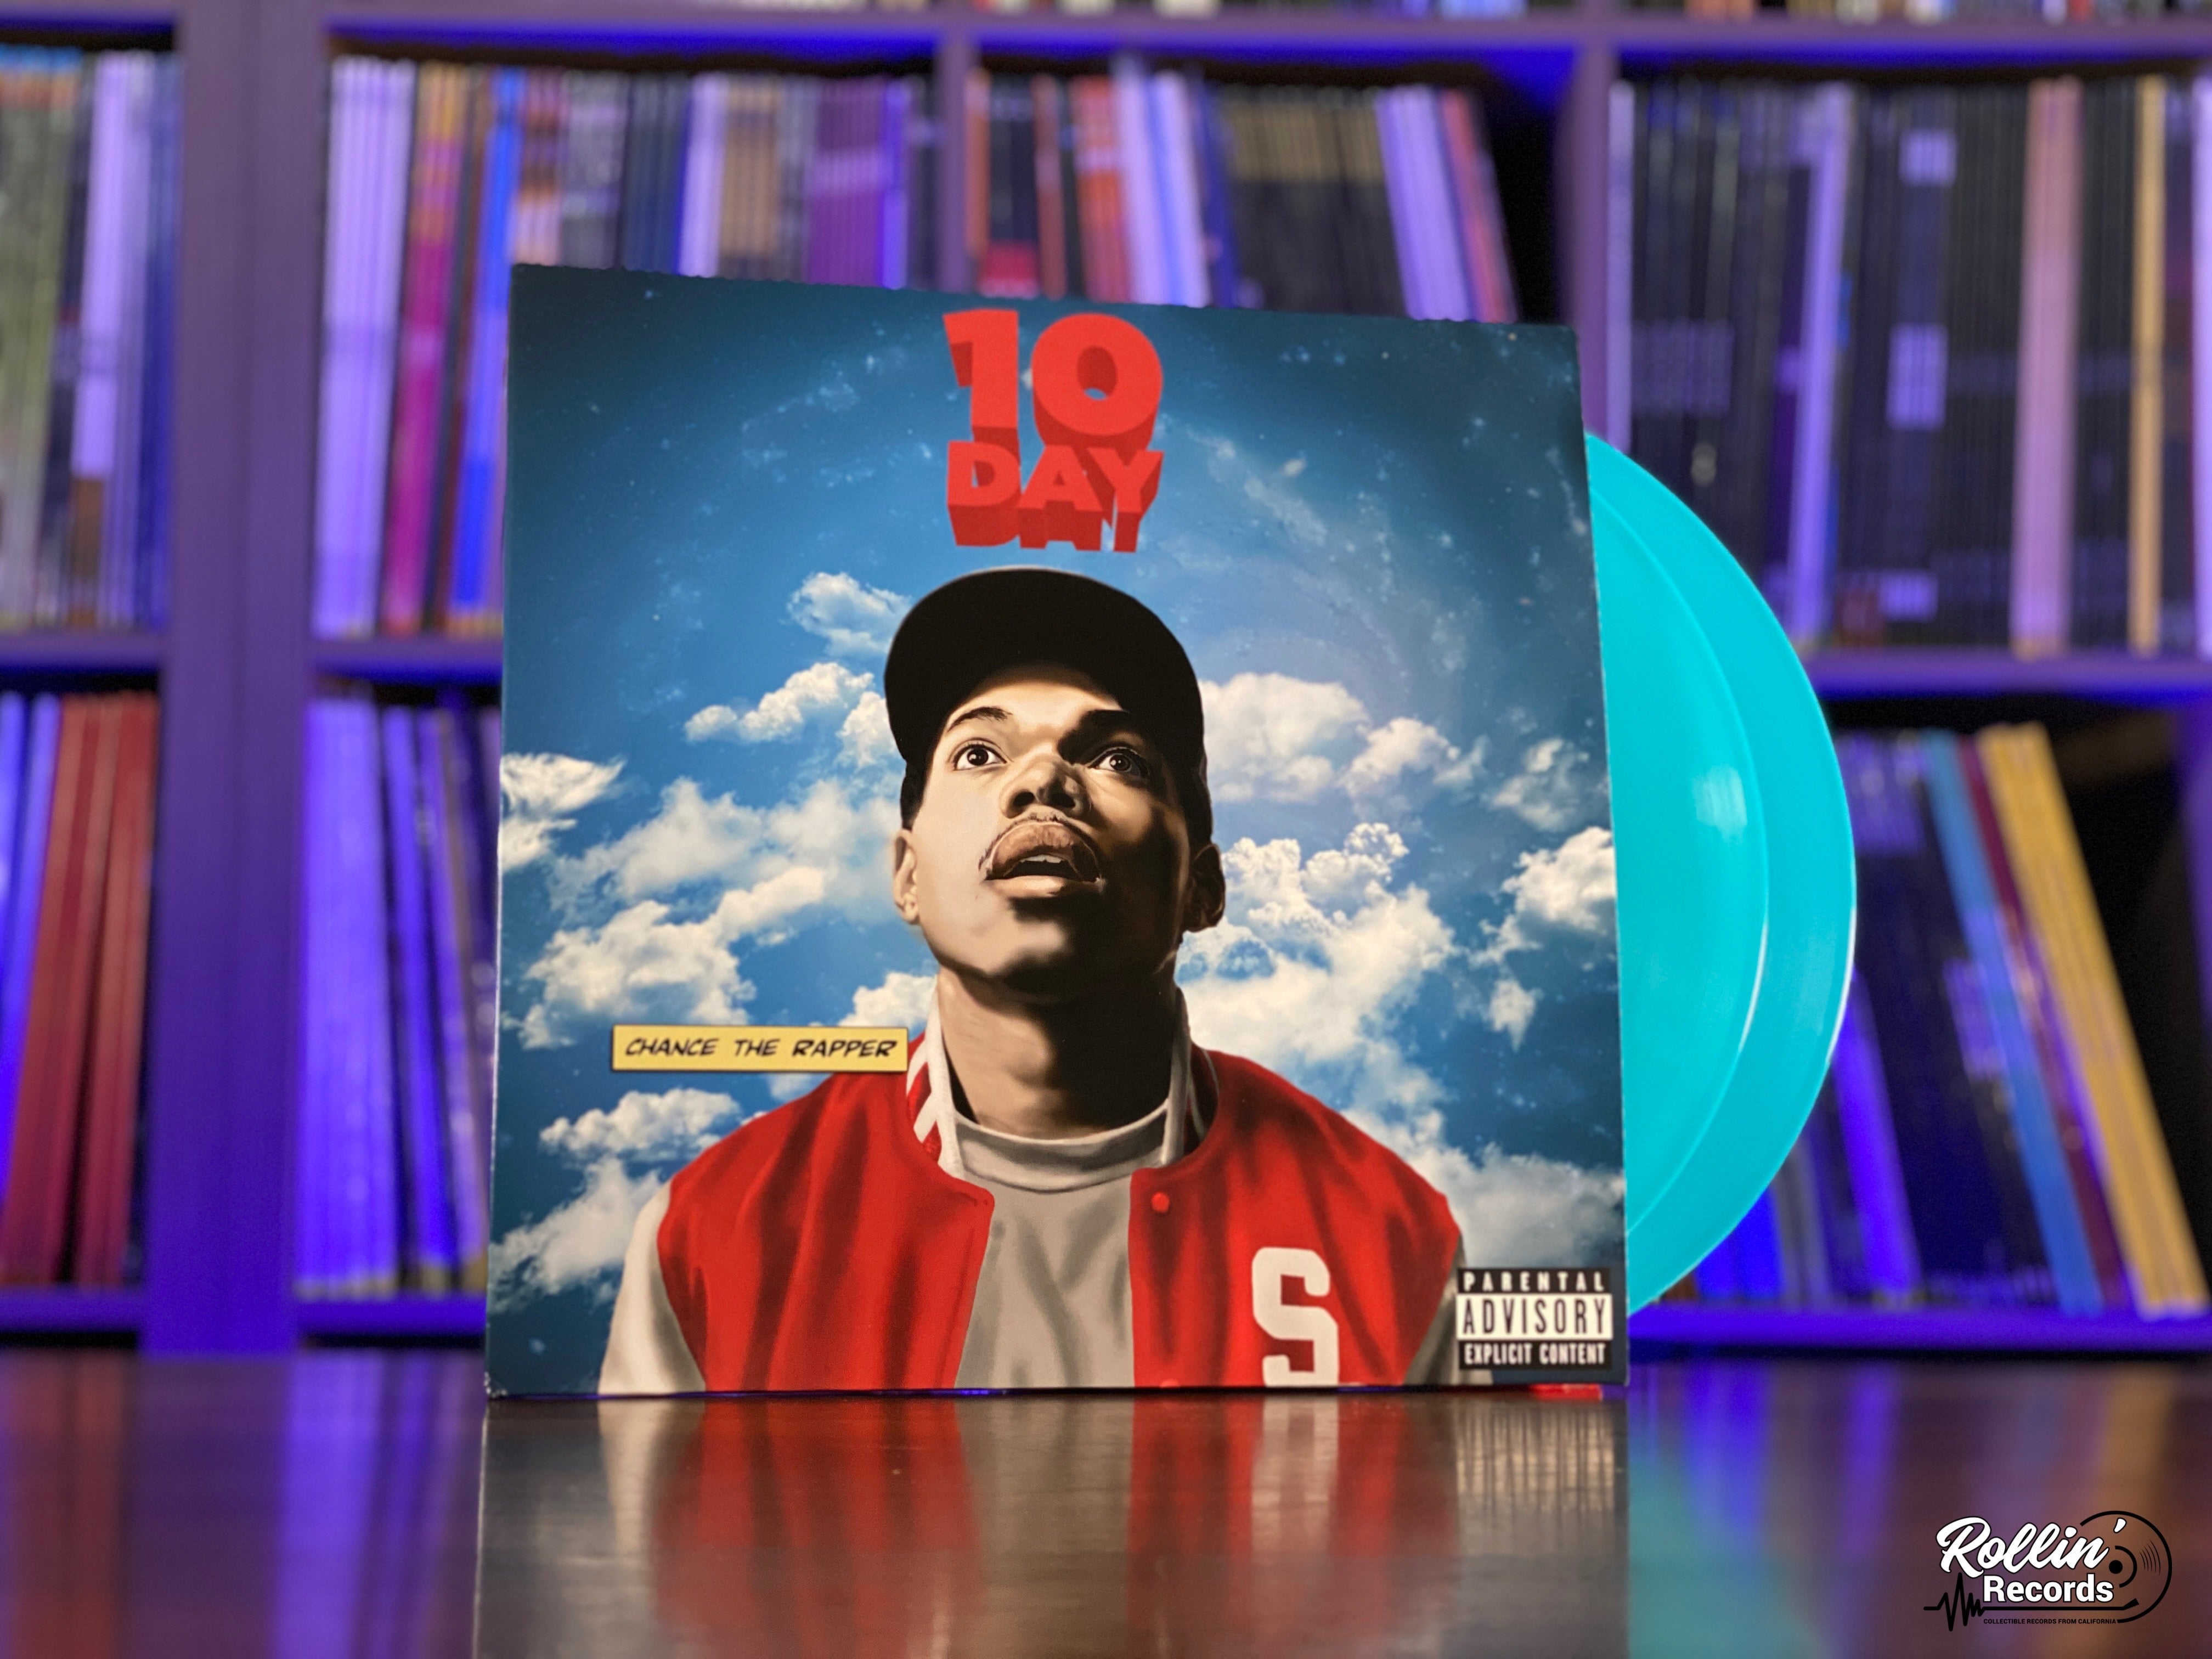 Chance The Rapper - 10 Day (Gatefold) – Rollin' Records